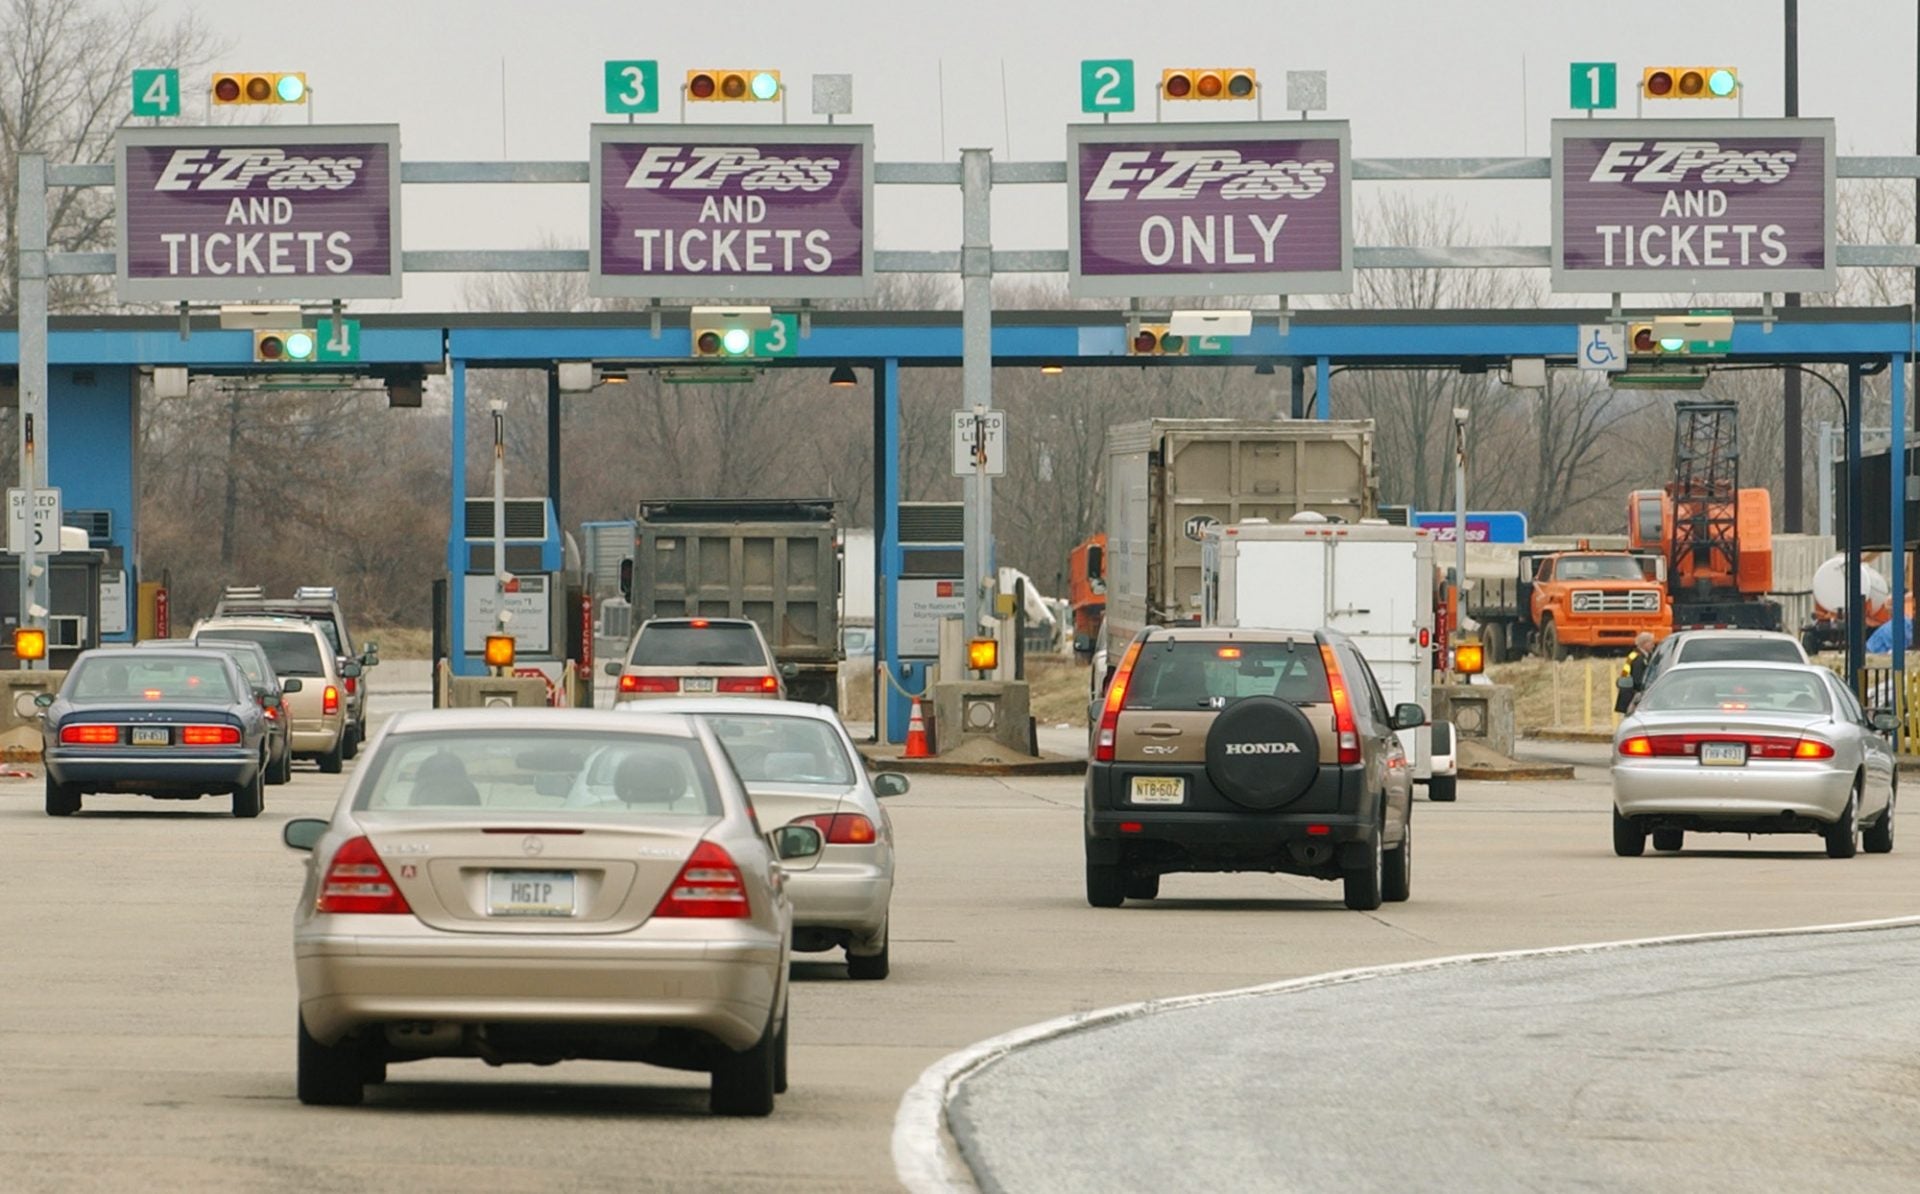 wv turnpike easy pass for residents